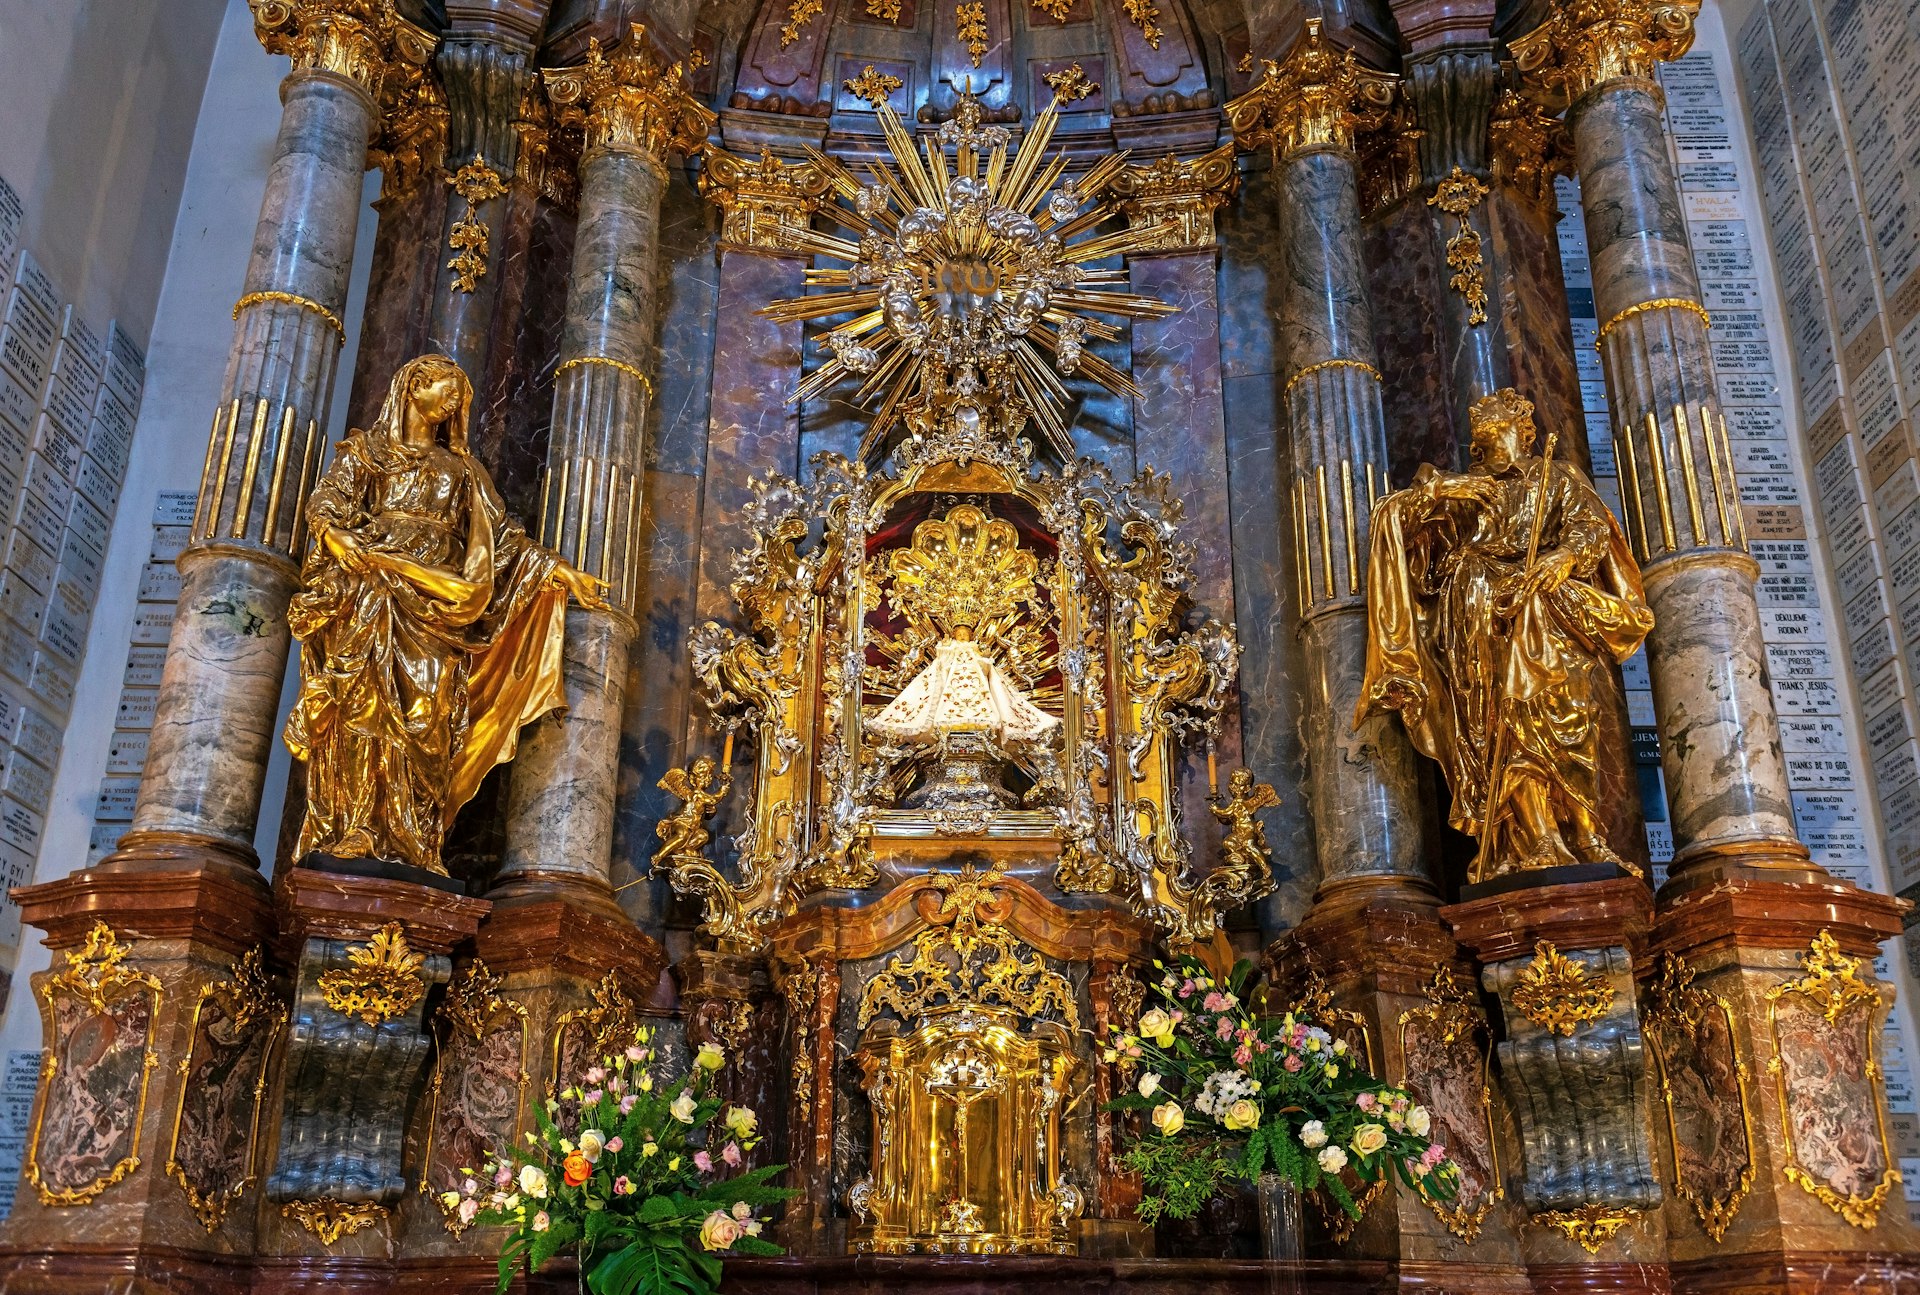 A small statue of an infant Jesus stands in the centre of a lavish, golden shrine in a church in Prague. The statue is wearing a white cloak.